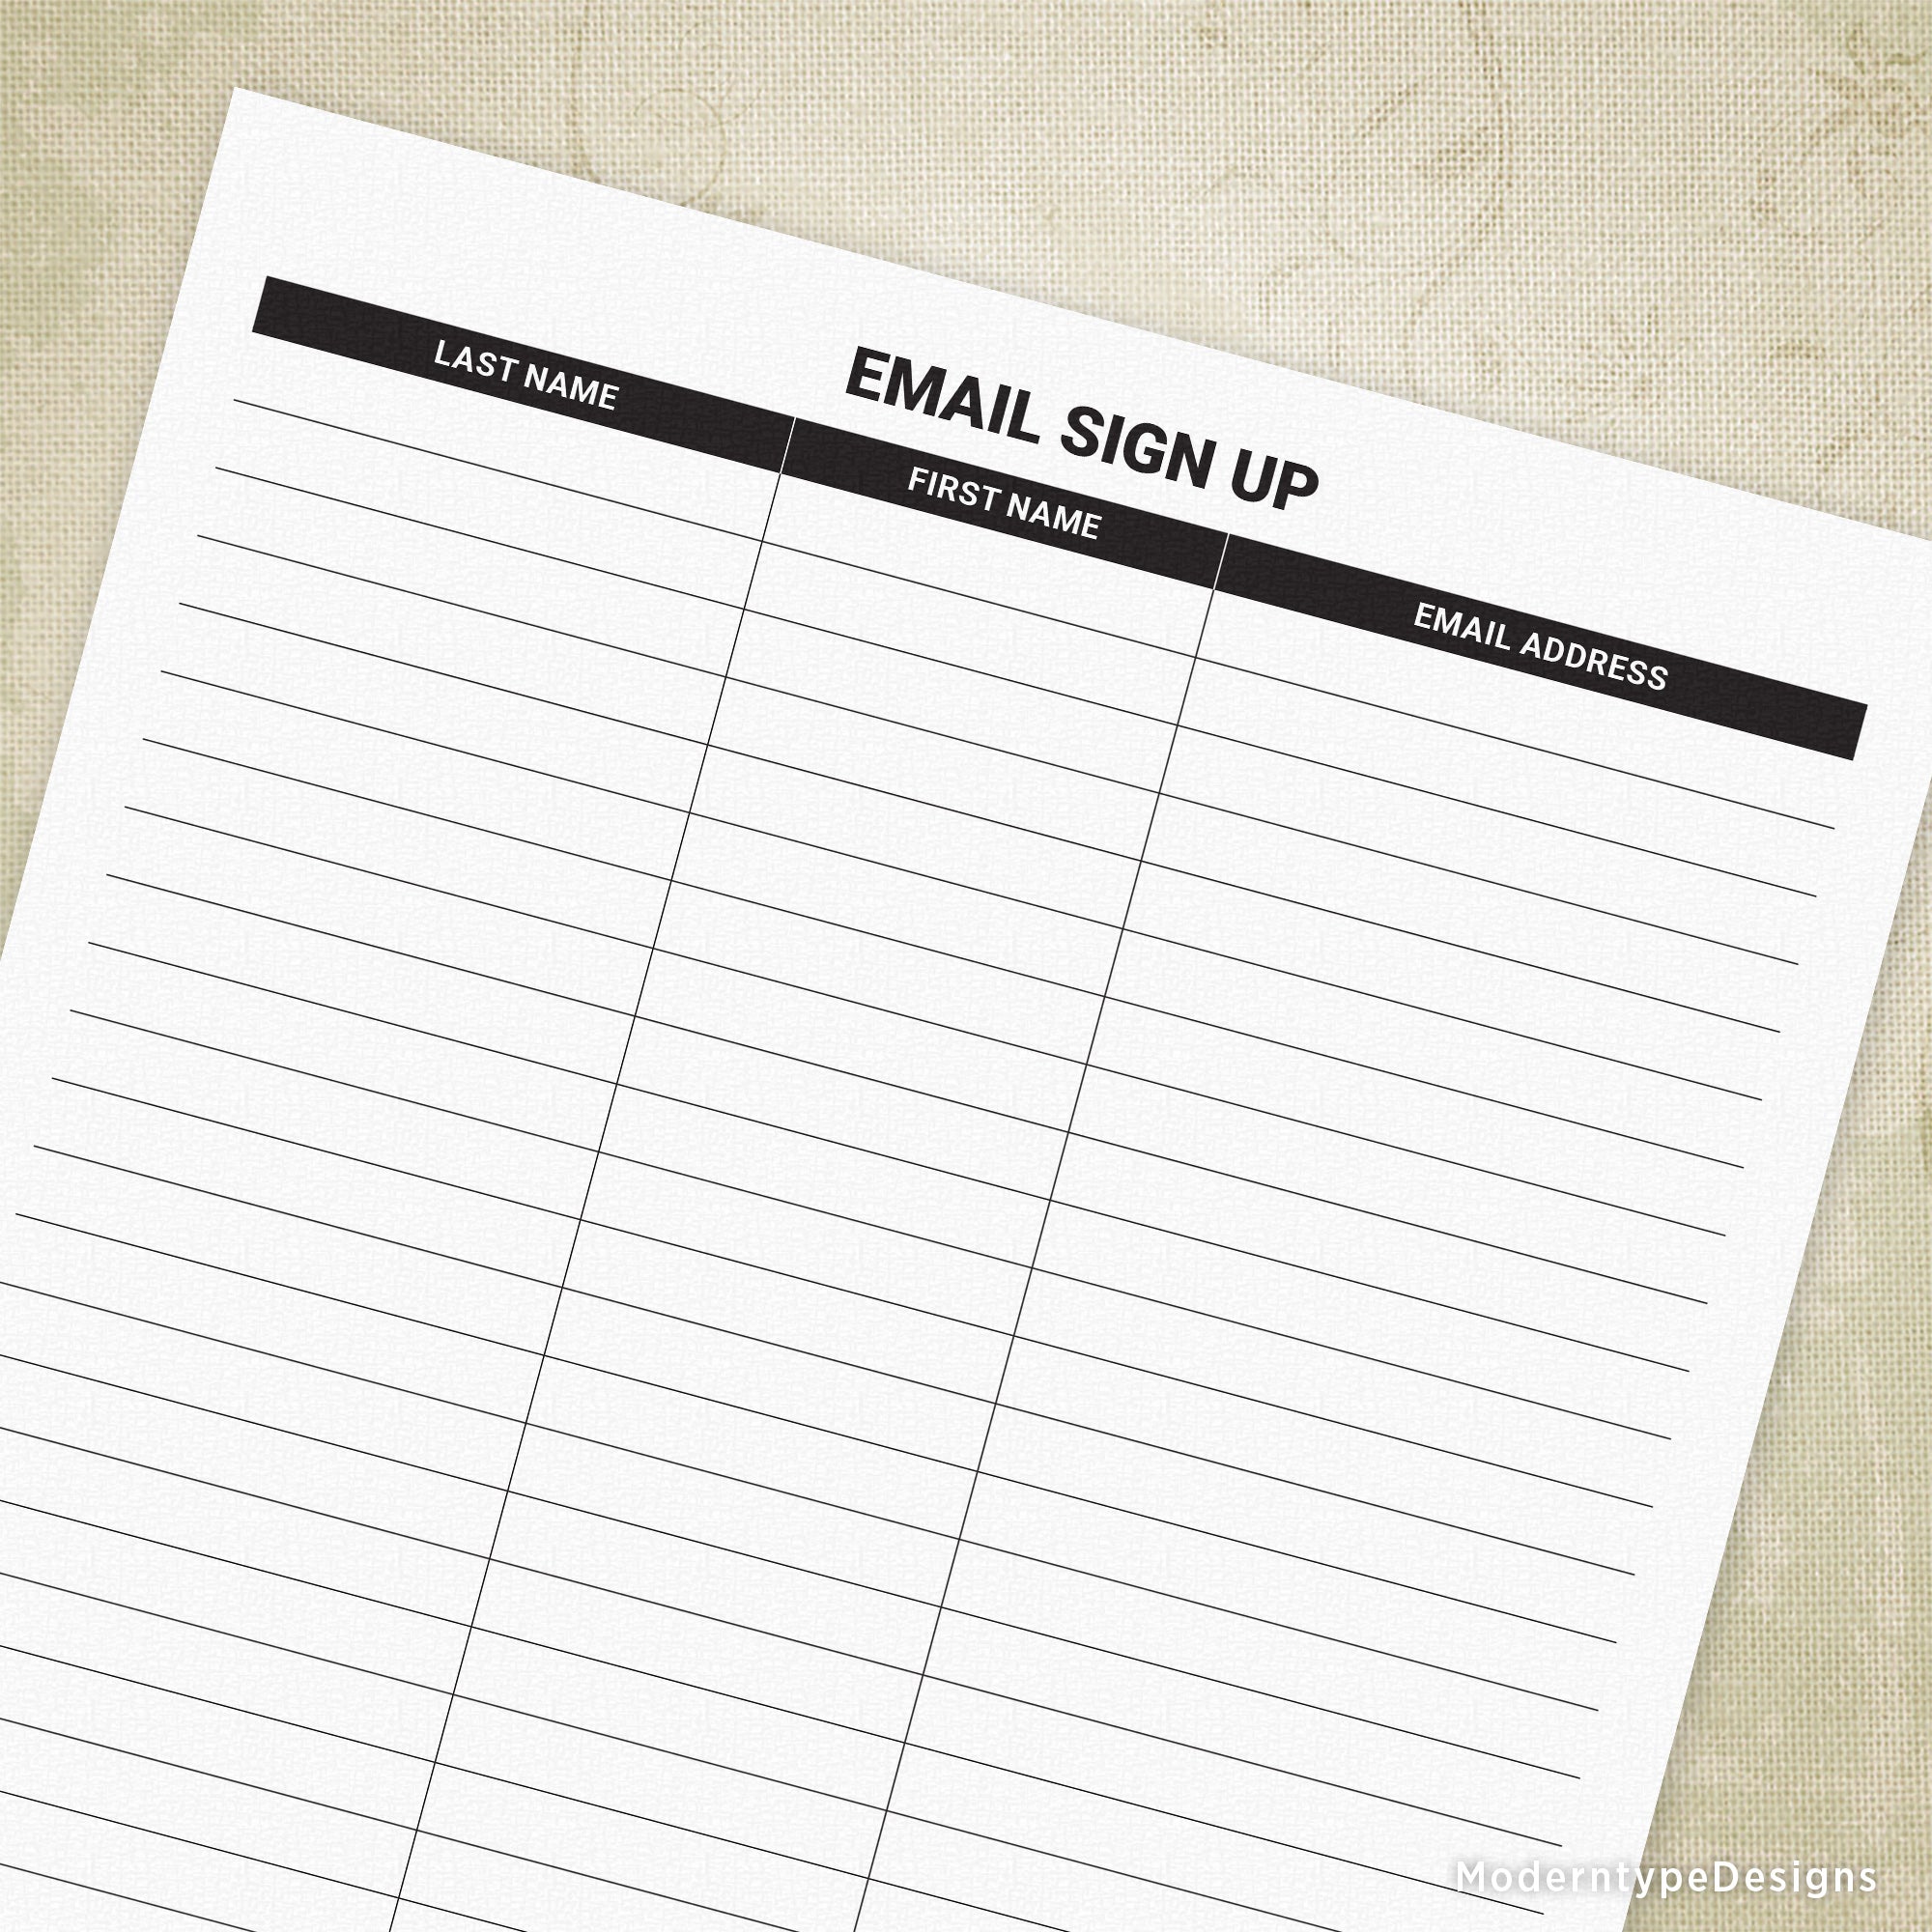 Email Sign Up Sheet Printable for Clipboard